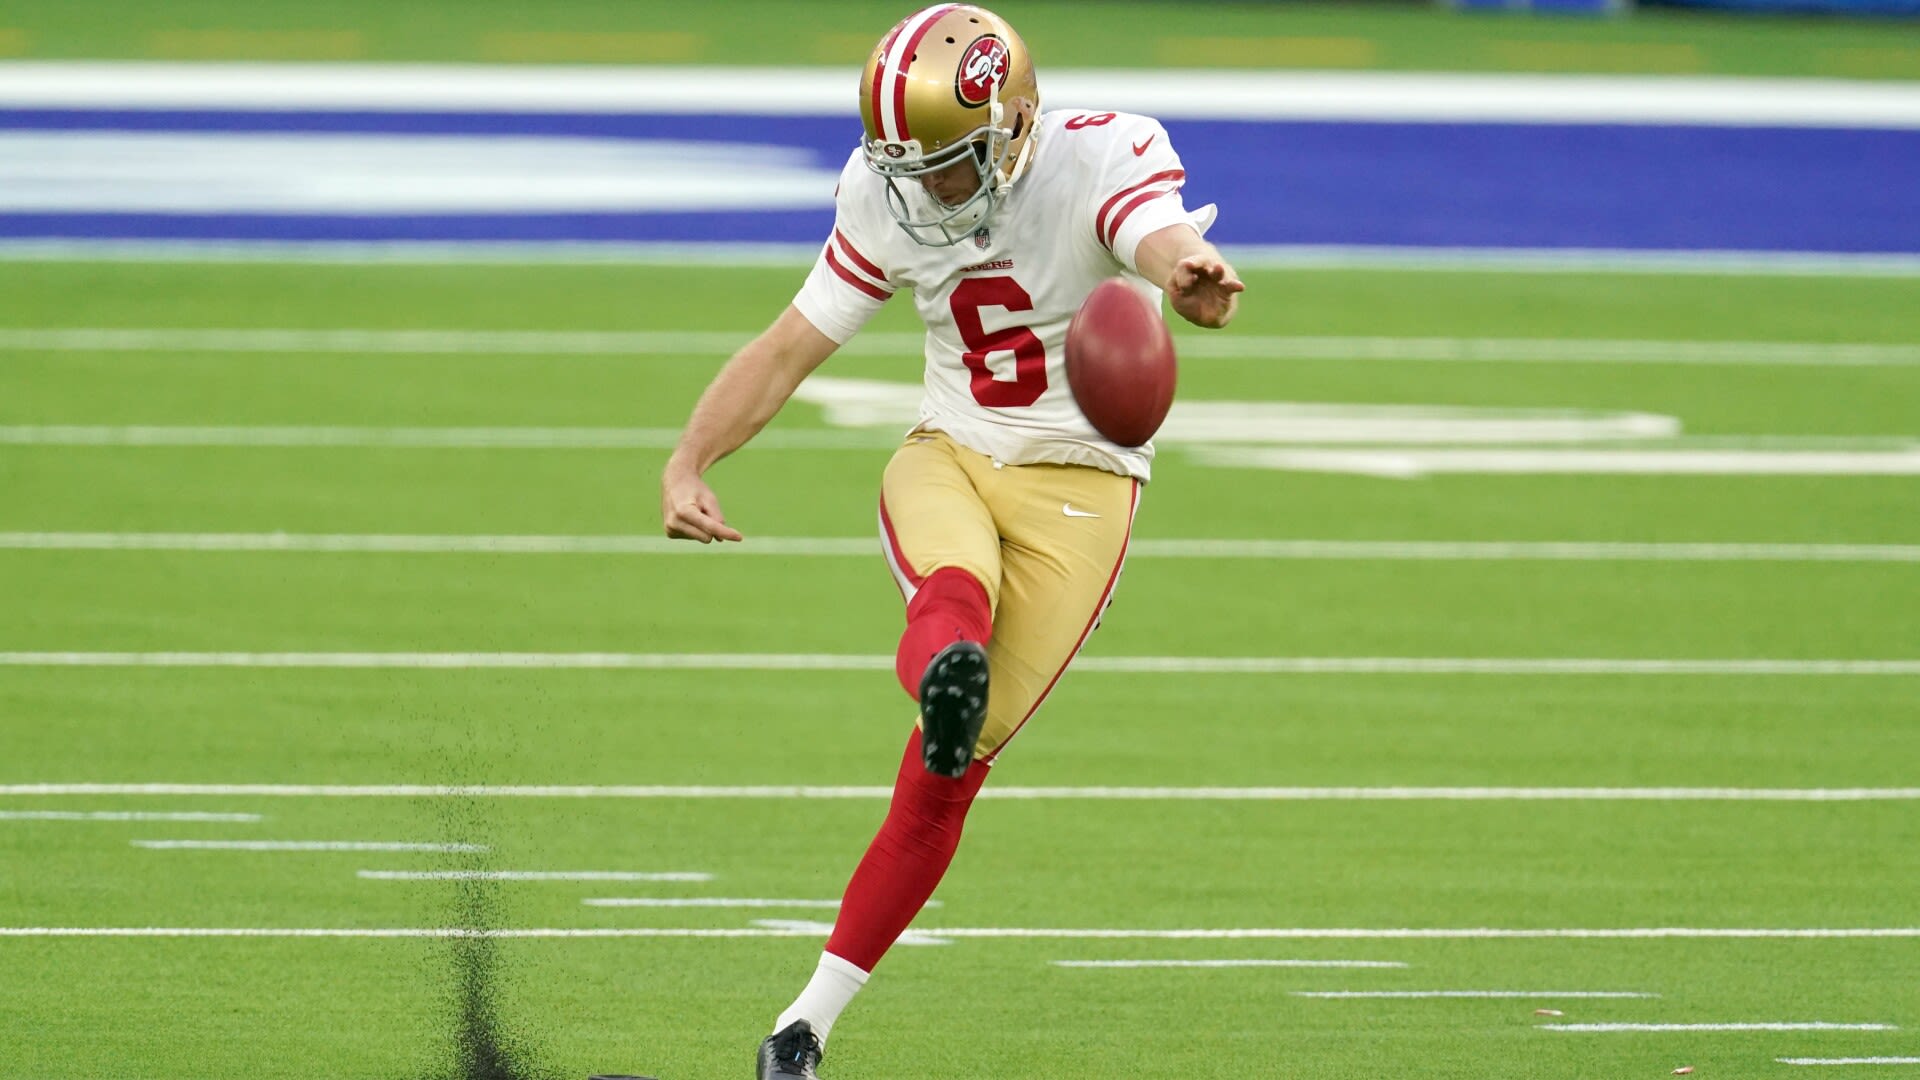 The 49ers, like all teams, are processing the massive change to the kickoff